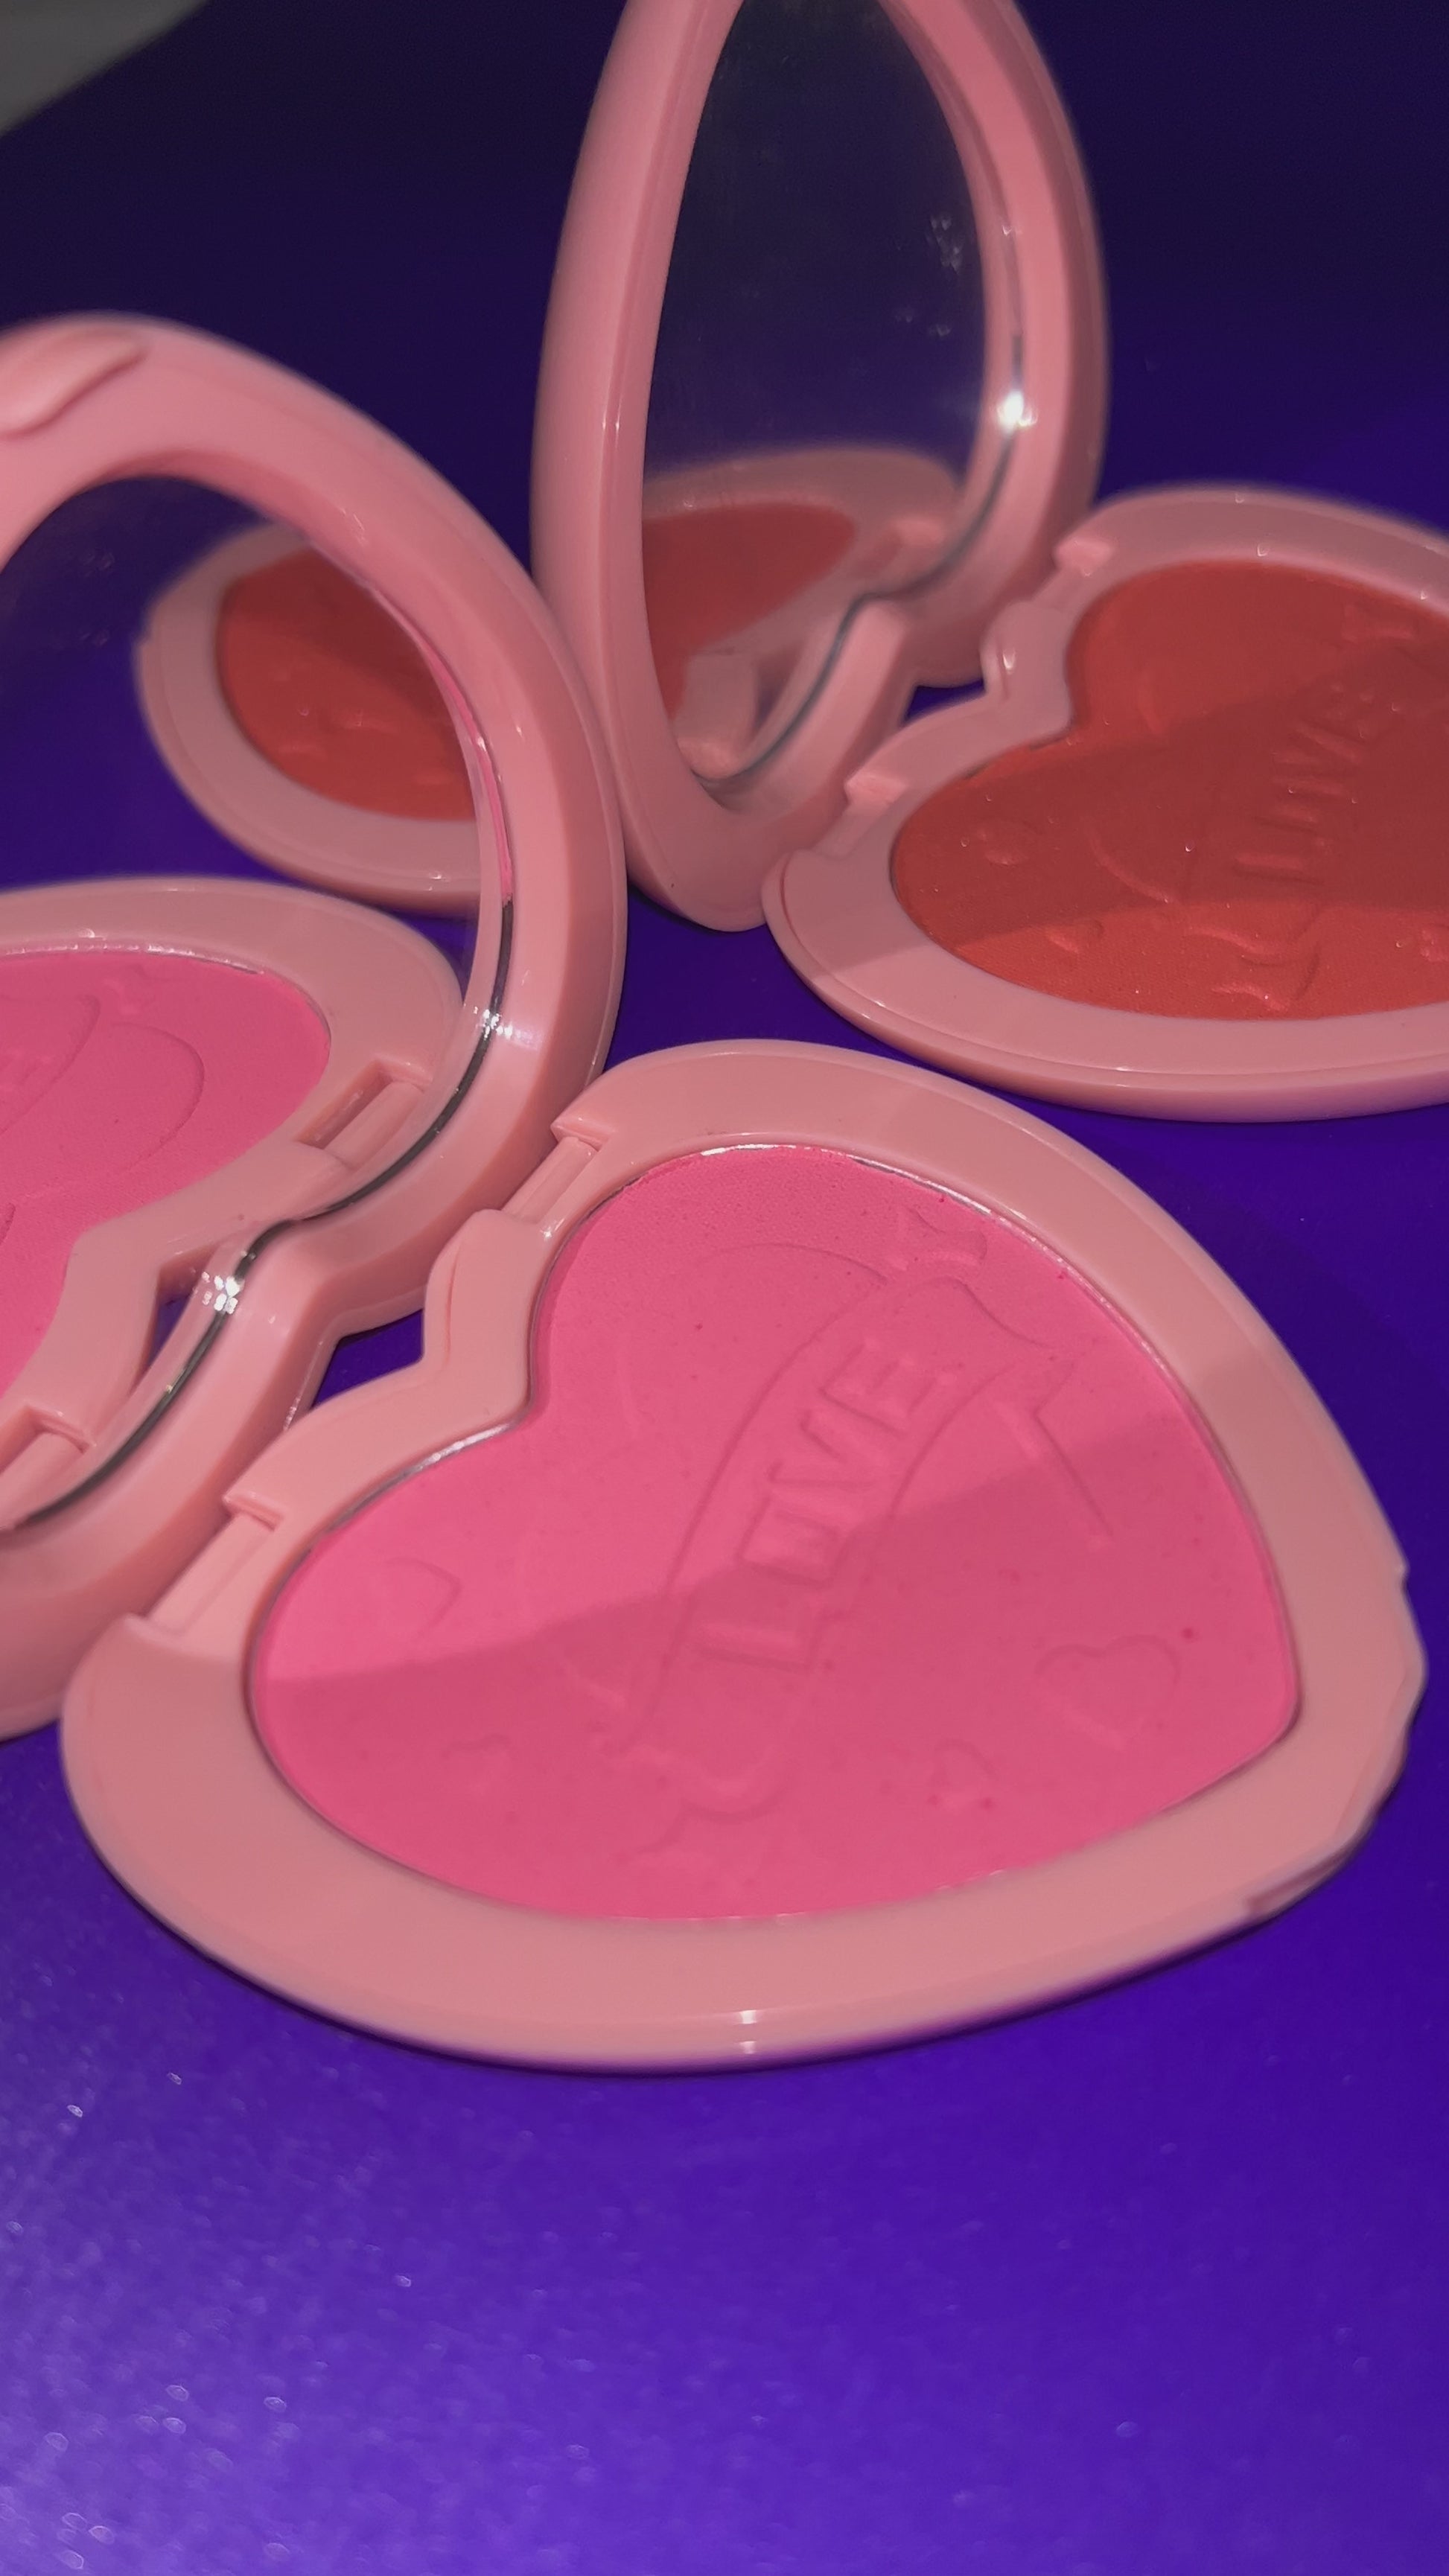 Sweetheart Pressed Mineral Blush